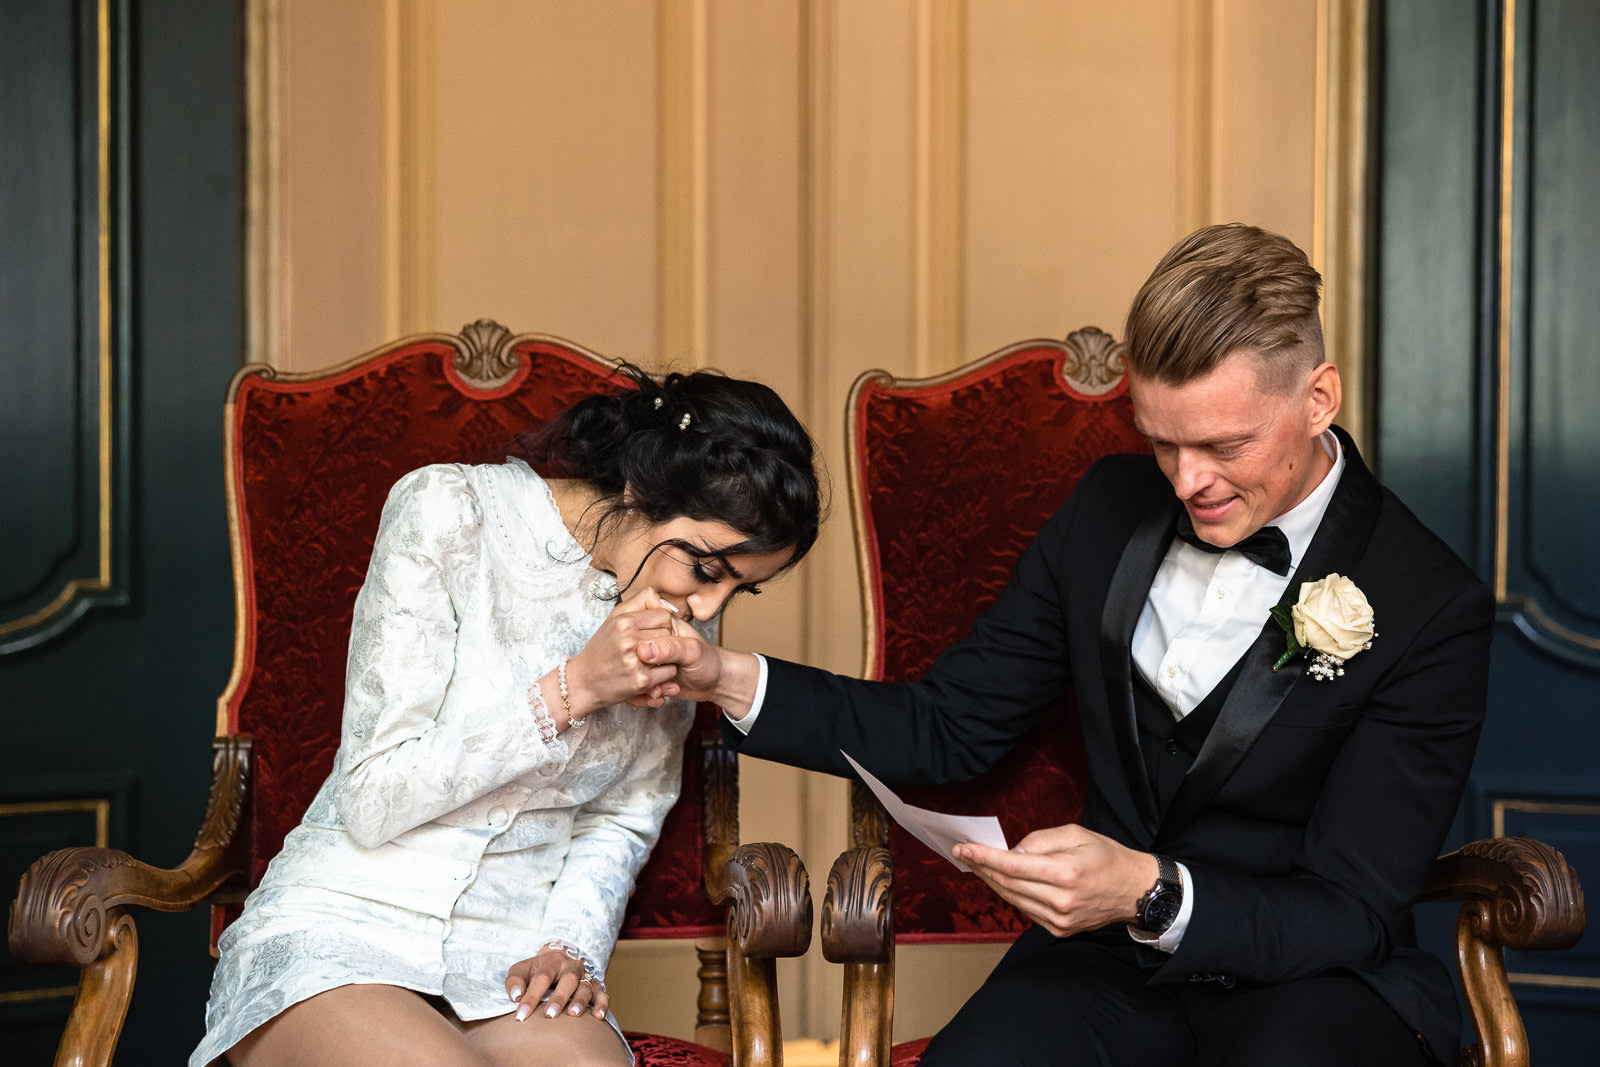 Groom tears up during wedding vows Wedding photographer The Hague 